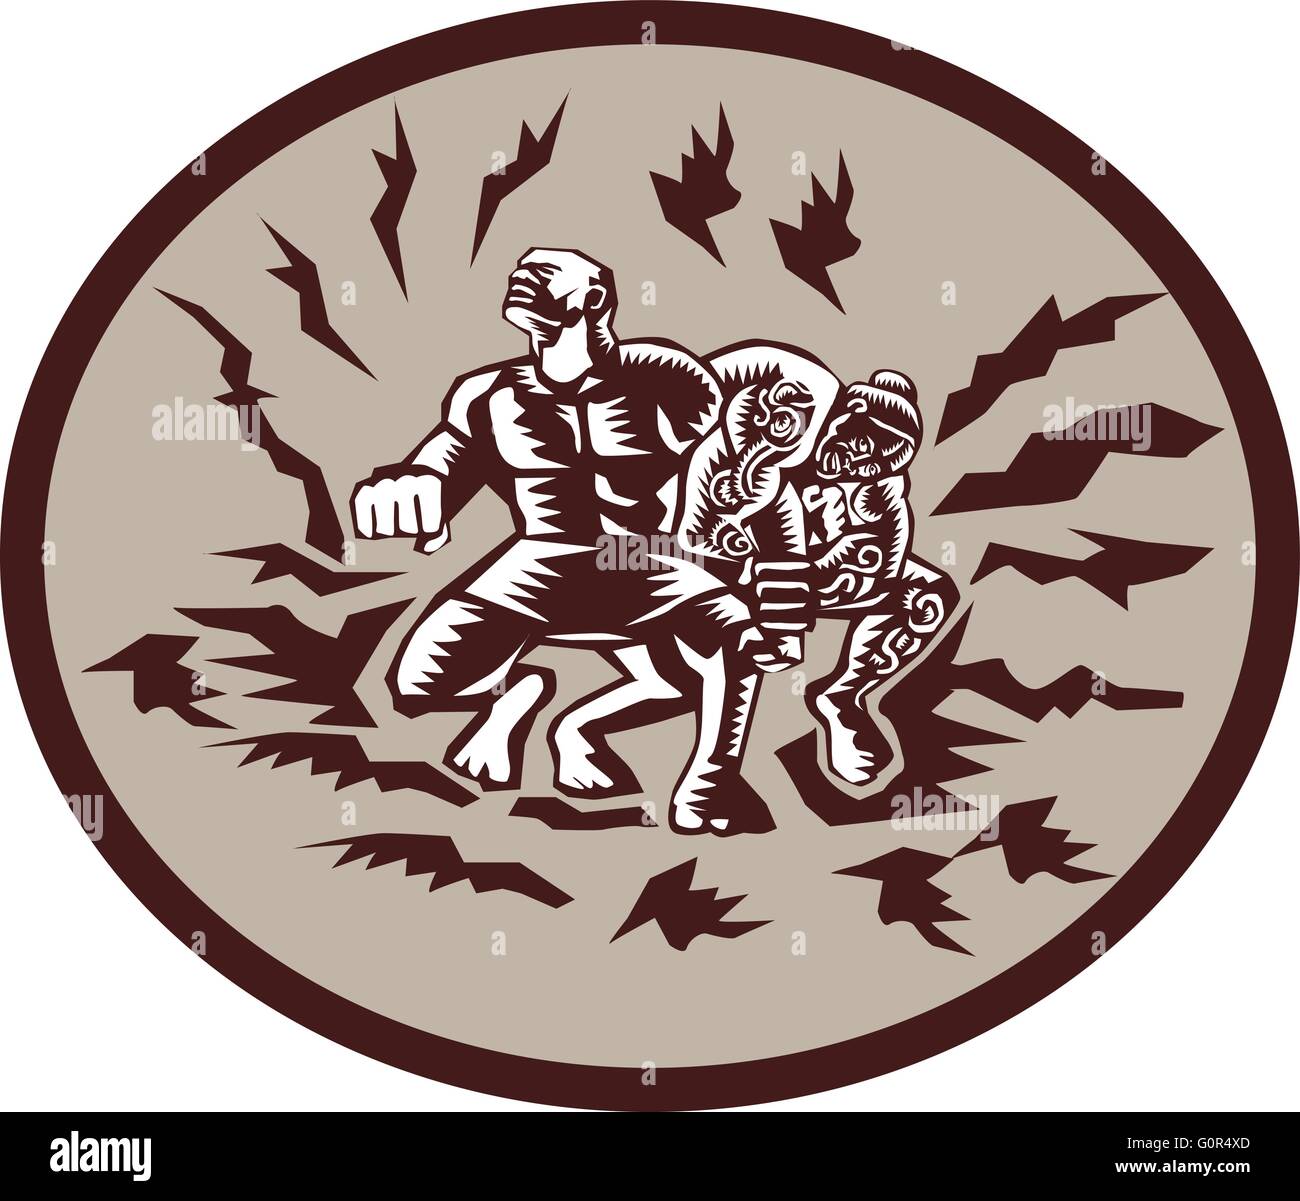 Illustration of Samoan legend Tiitii wrestling the God of Earthquake and breaking his arm set inside circle done in retro woodcut style Stock Vector